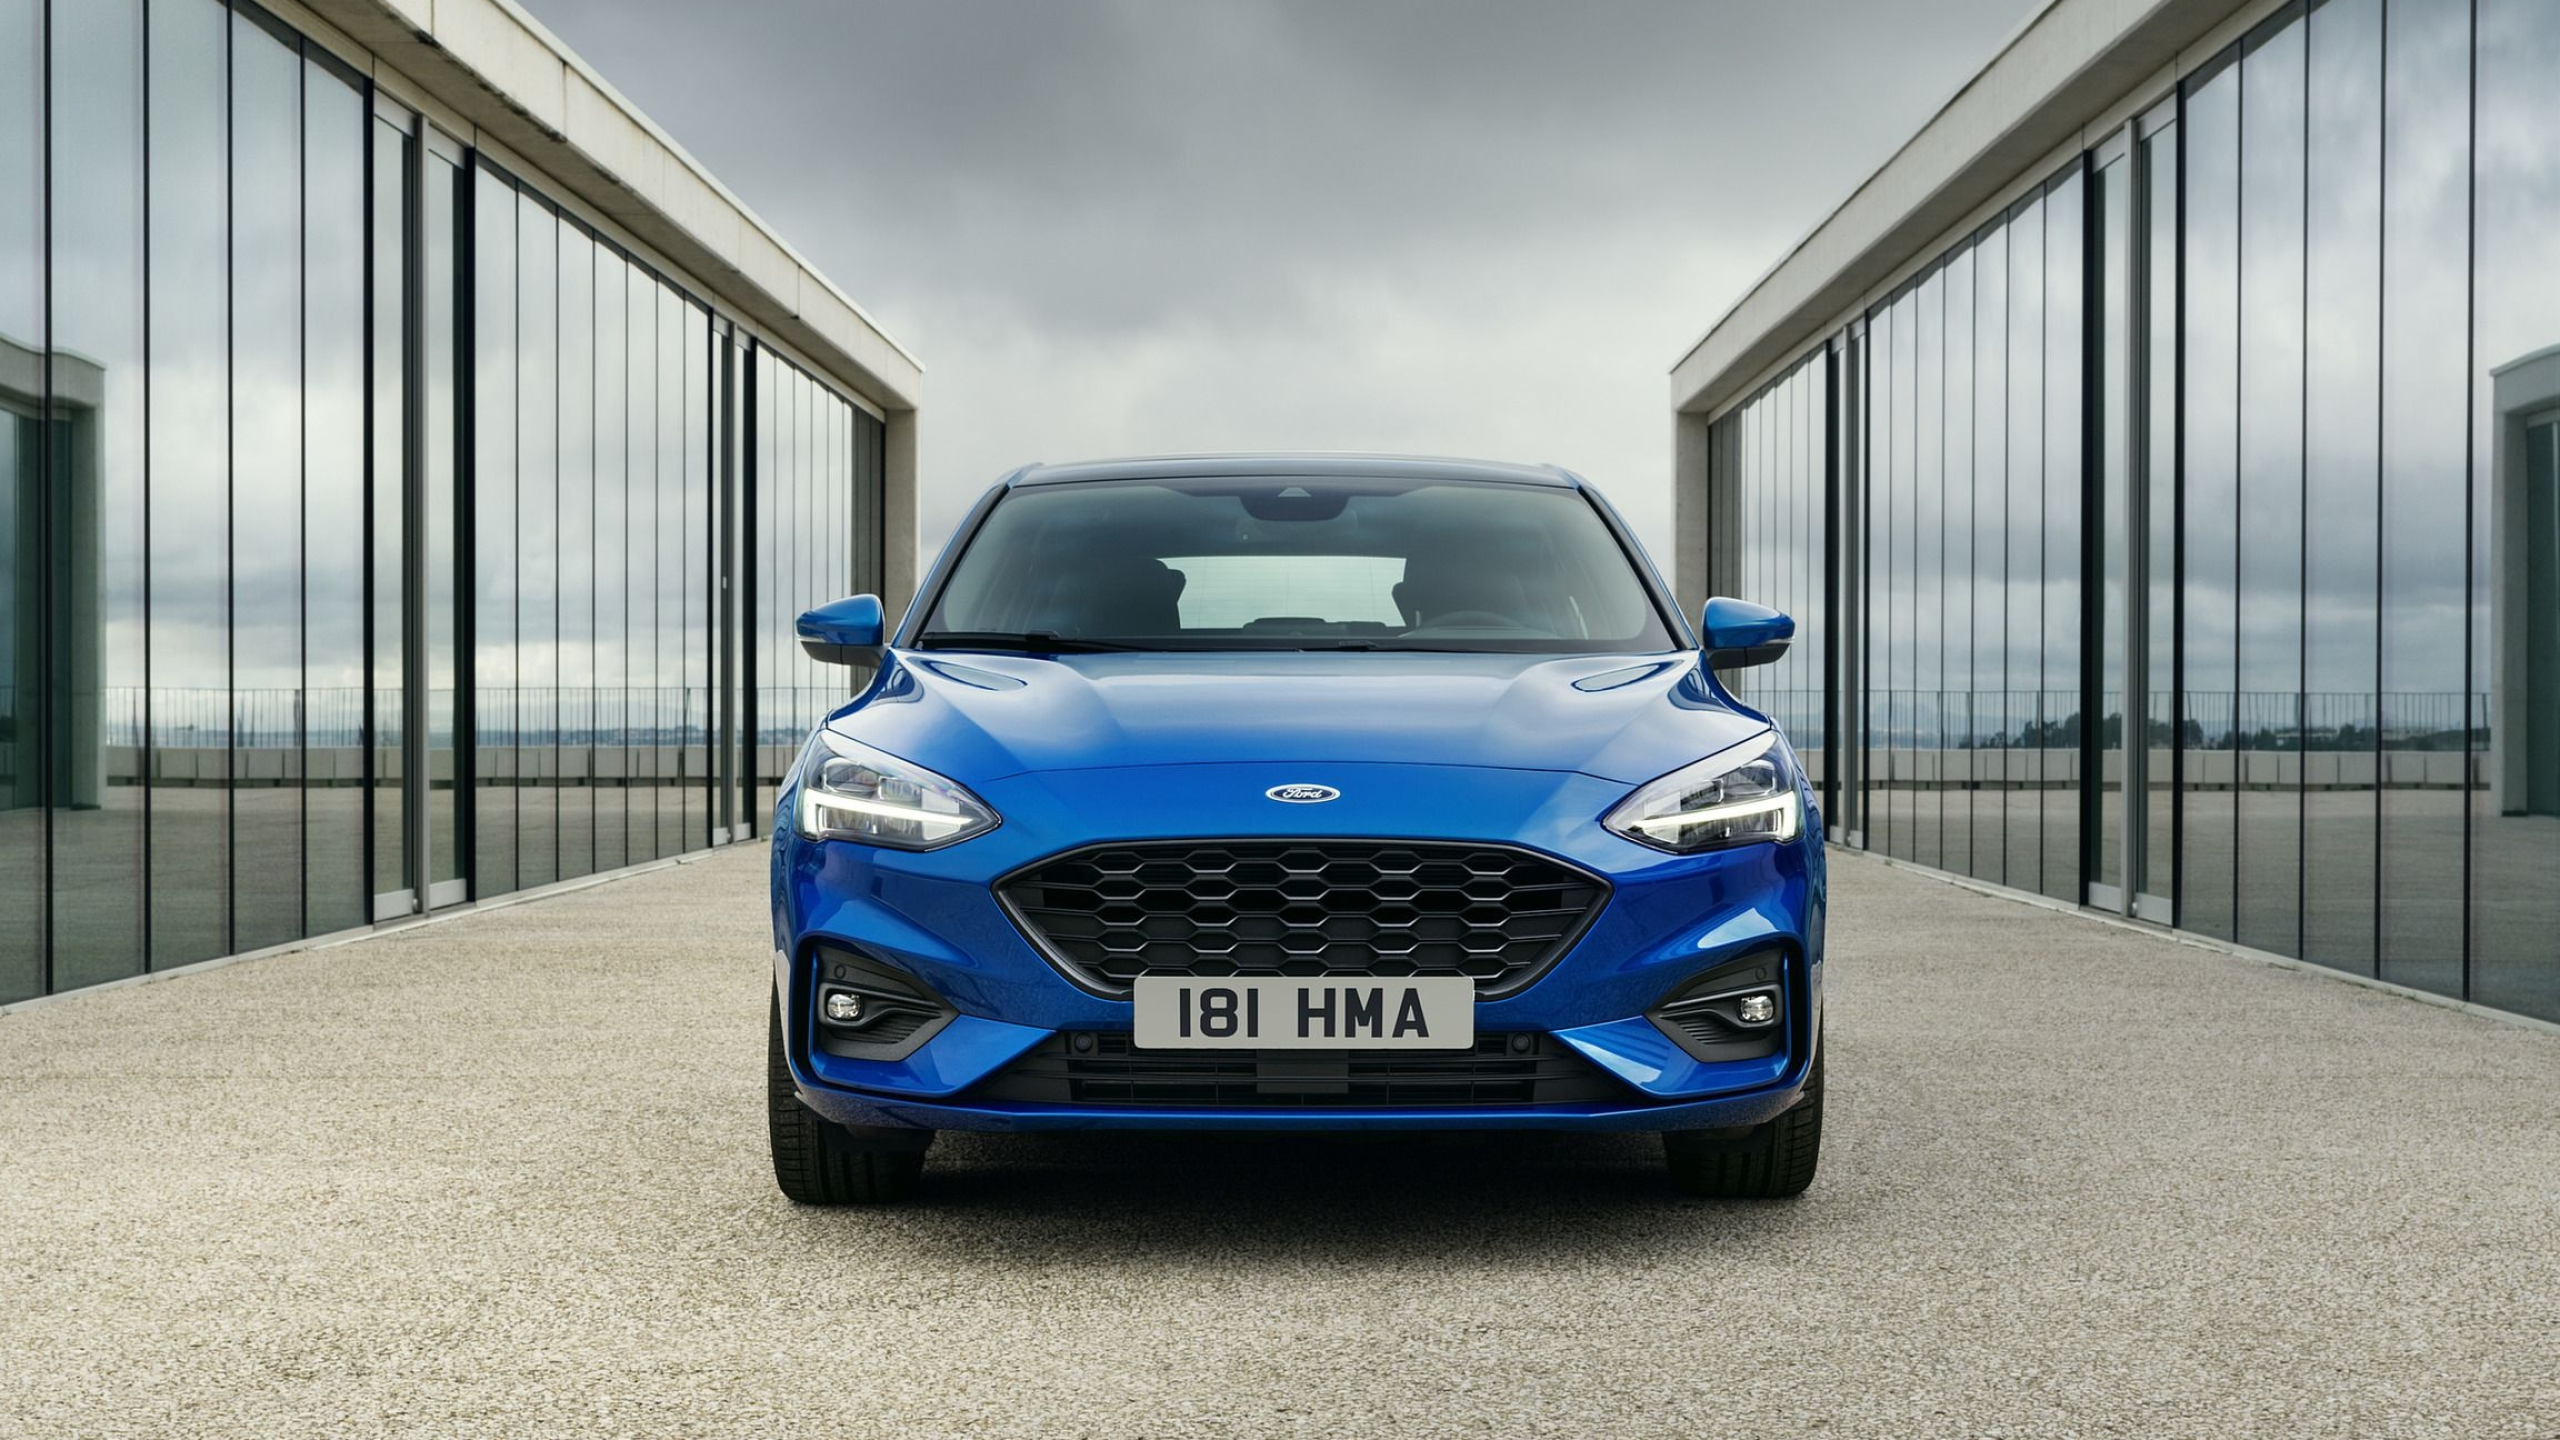 Ford Focus: First generation was manufactured in Europe from 1998 to 2004. 2560x1440 HD Wallpaper.